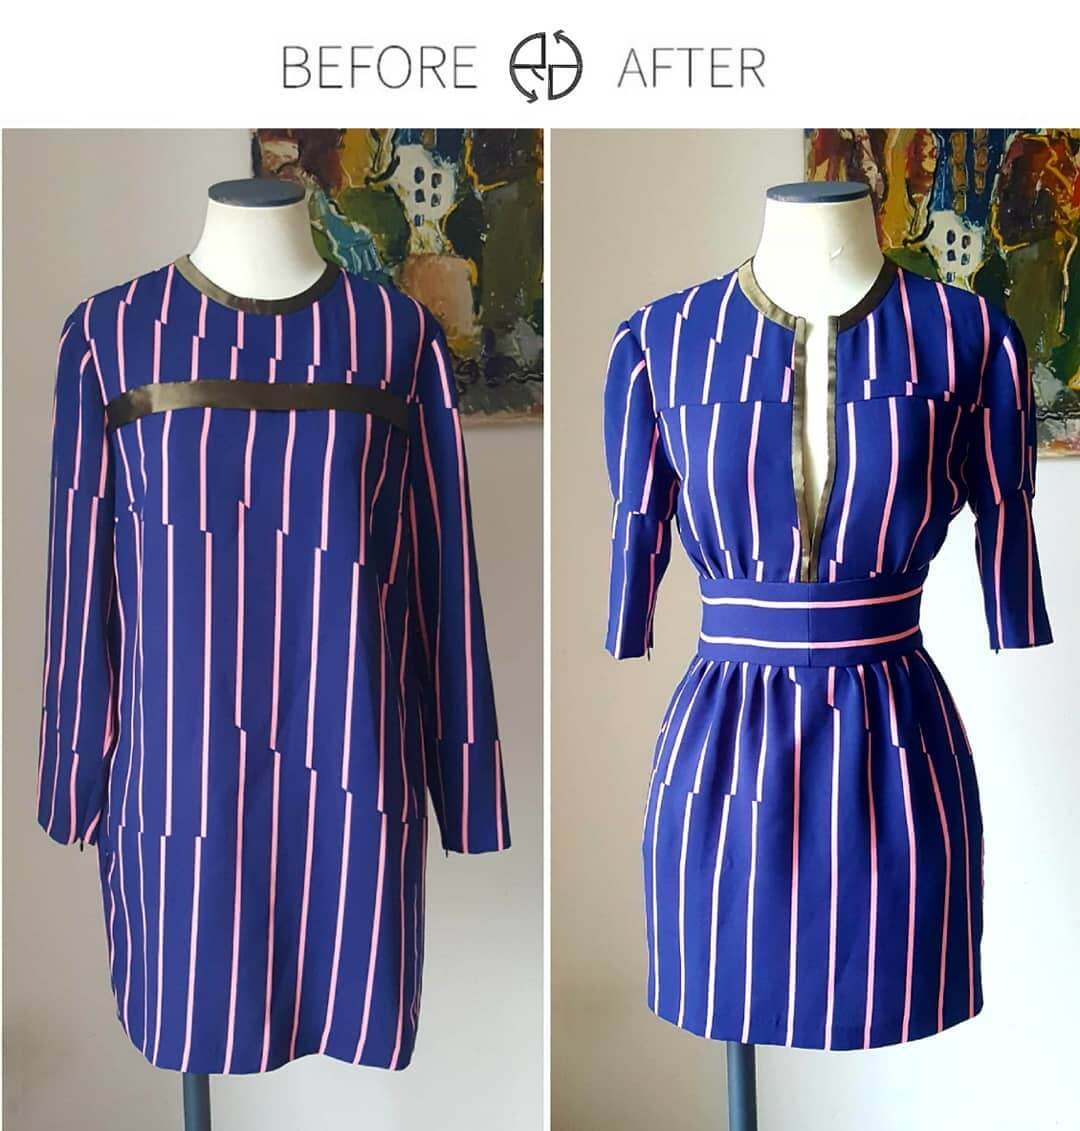 Alter The Neck And Add A Belt For A Fresh Vibe DIY Ideas To Transform Old Clothes